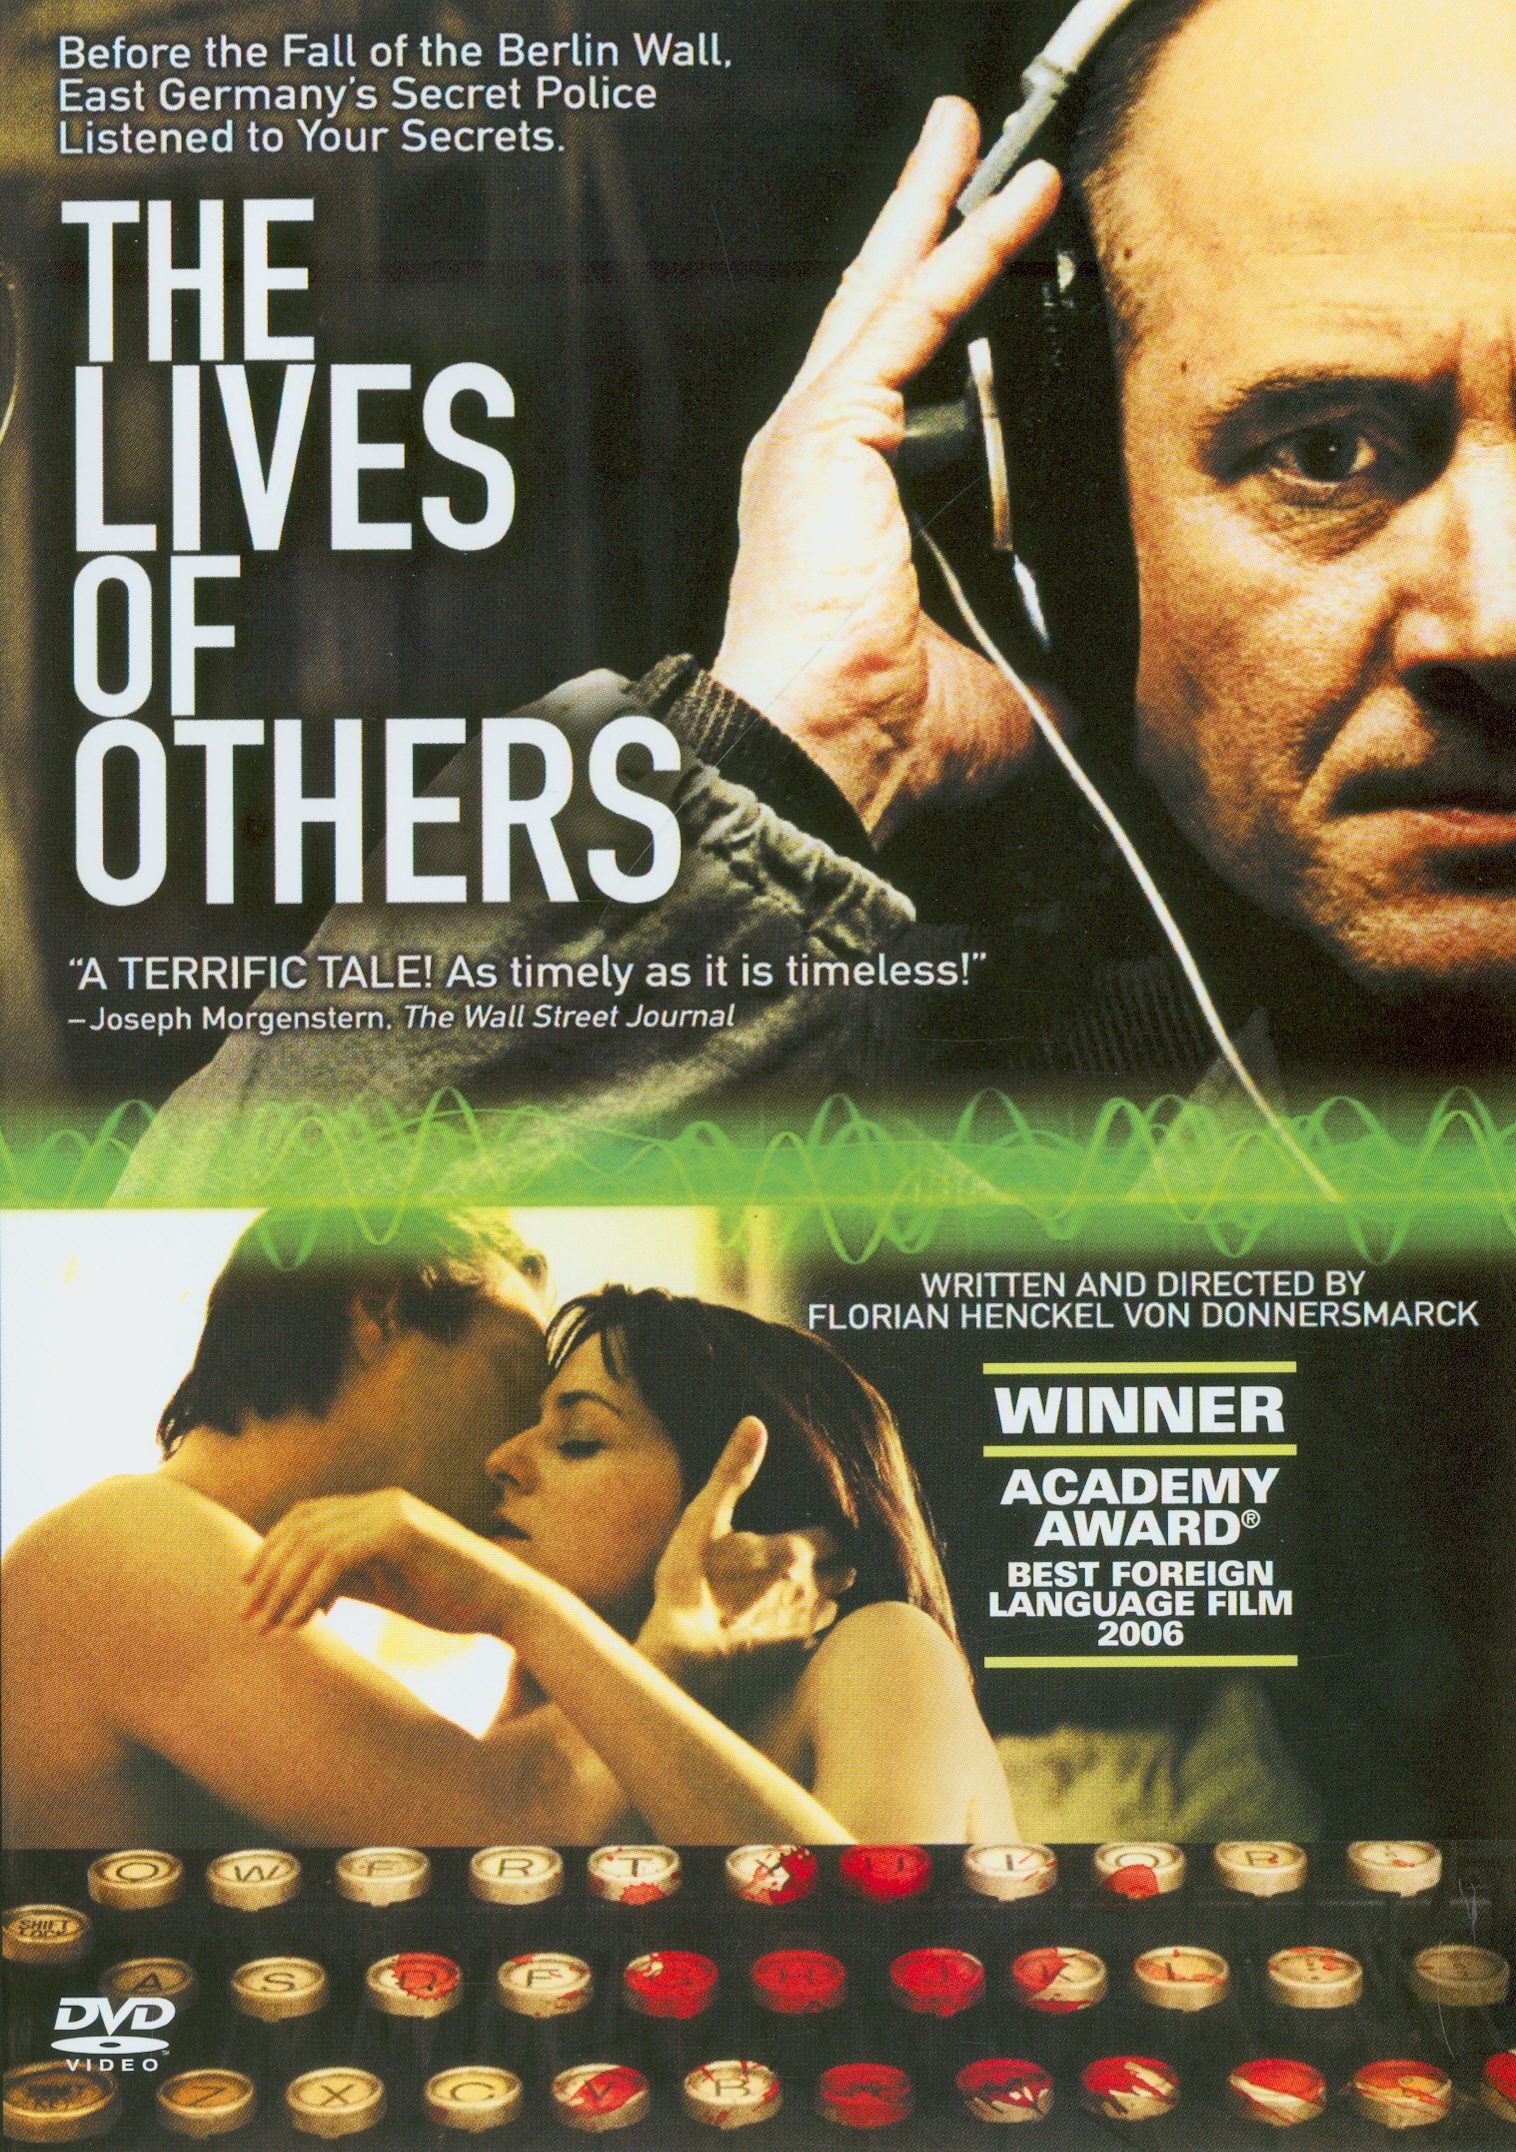  The Lives of others